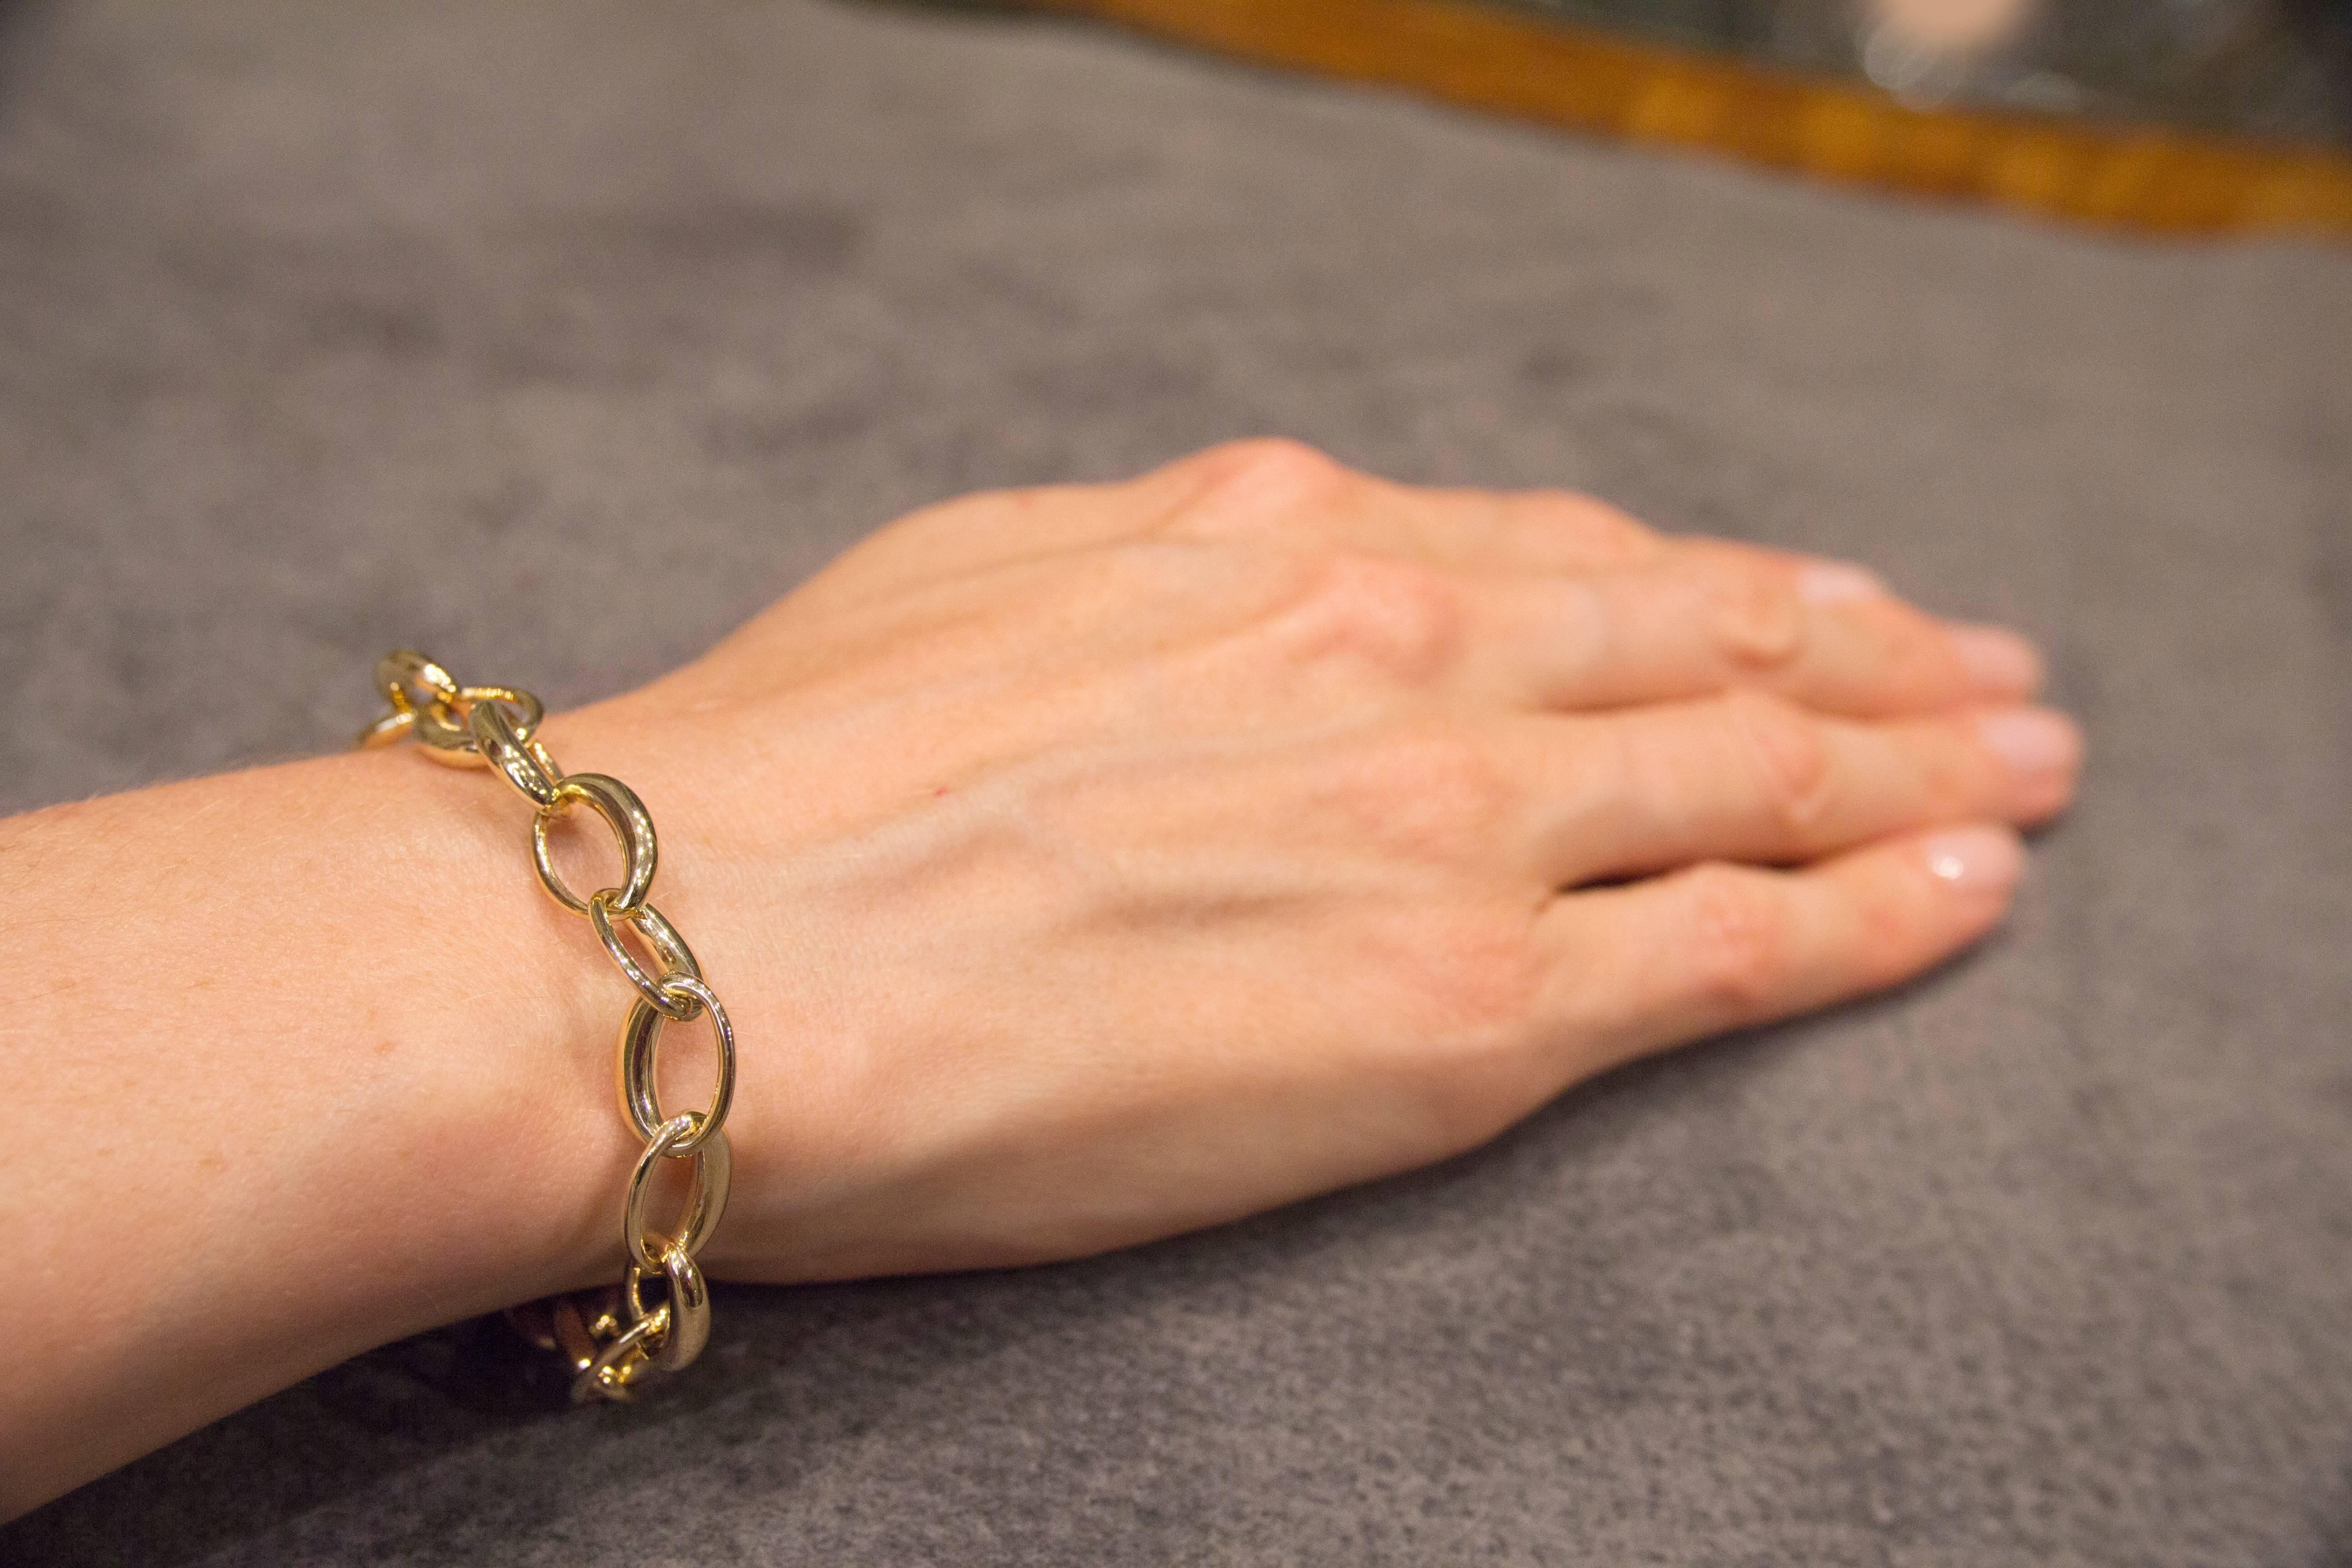 Jona design collection, hand crafted in Italy, 18 karat yellow gold, 7.5 in.-19cm long chain bracelet.
All Jona jewelry is new and has never been previously owned or worn. Each item will arrive at your door beautifully gift wrapped in Jona boxes,